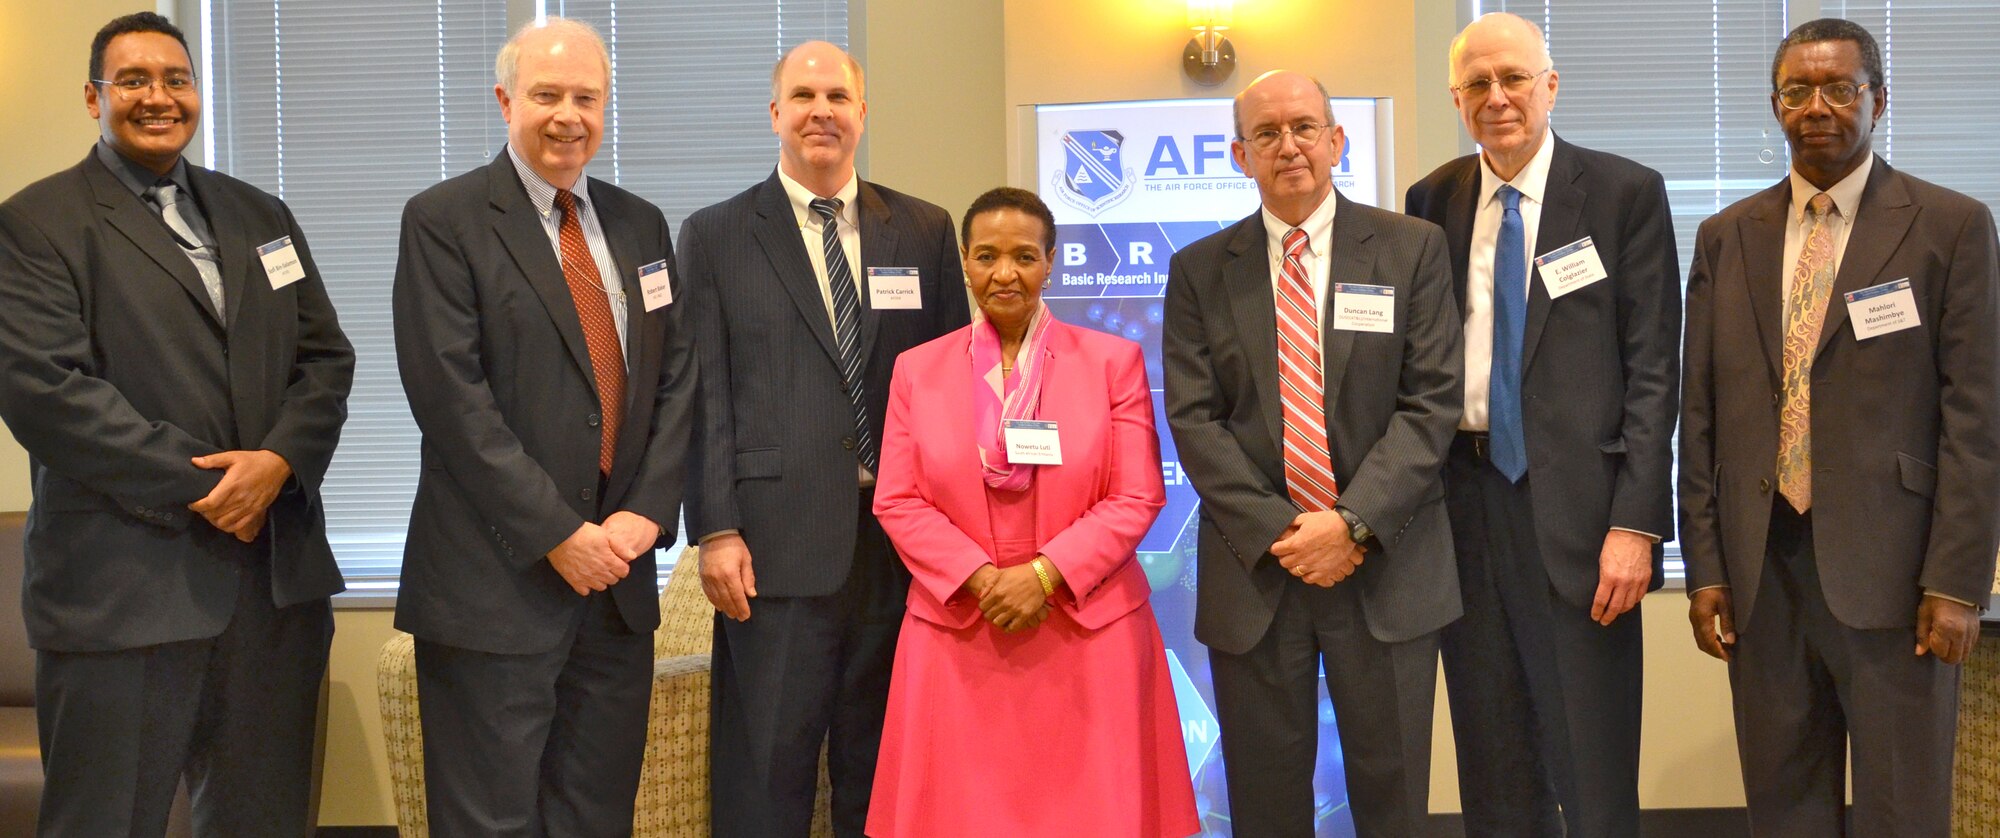 U.S. - South Africa Advanced Materials Working Group recently met in Arlington, Virginia, during the U.S. Joint Services and Office of the Secretary of Defense, African Technical Exchange, hosted by the Air Force Office of Scientific Research (AFOSR), held in May (Left to Right) Dr. Sofi Bin-Salamon, Program Officer, International Office, AFOSR and Working Group Co-Chair, Mr. Robert Baker, Deputy, Plans and Program, Assistant Secretary of Defense for Research & Engineering, Dr. Pat Carrick, Director, Basic Science Program Office, AFOSR, Ms. Nowetu E. Luti, Deputy Chief of Mission, The Embassy of the Republic of South Africa, Mr. Duncan Lang, International Cooperation Officer, Office of the Under Secretary of Defense for Acquisition, Technology & Logistics, Dr. E. William Colglazier, S&T Advisor to the Secretary of State, and Dr. Mahlori Mashimbye, Director of Chemical Sciences, Republic of South Africa Department of Science & Technology, and Working Group Co-Chair. (U.S. Air Force photo/ Alea Stewart)